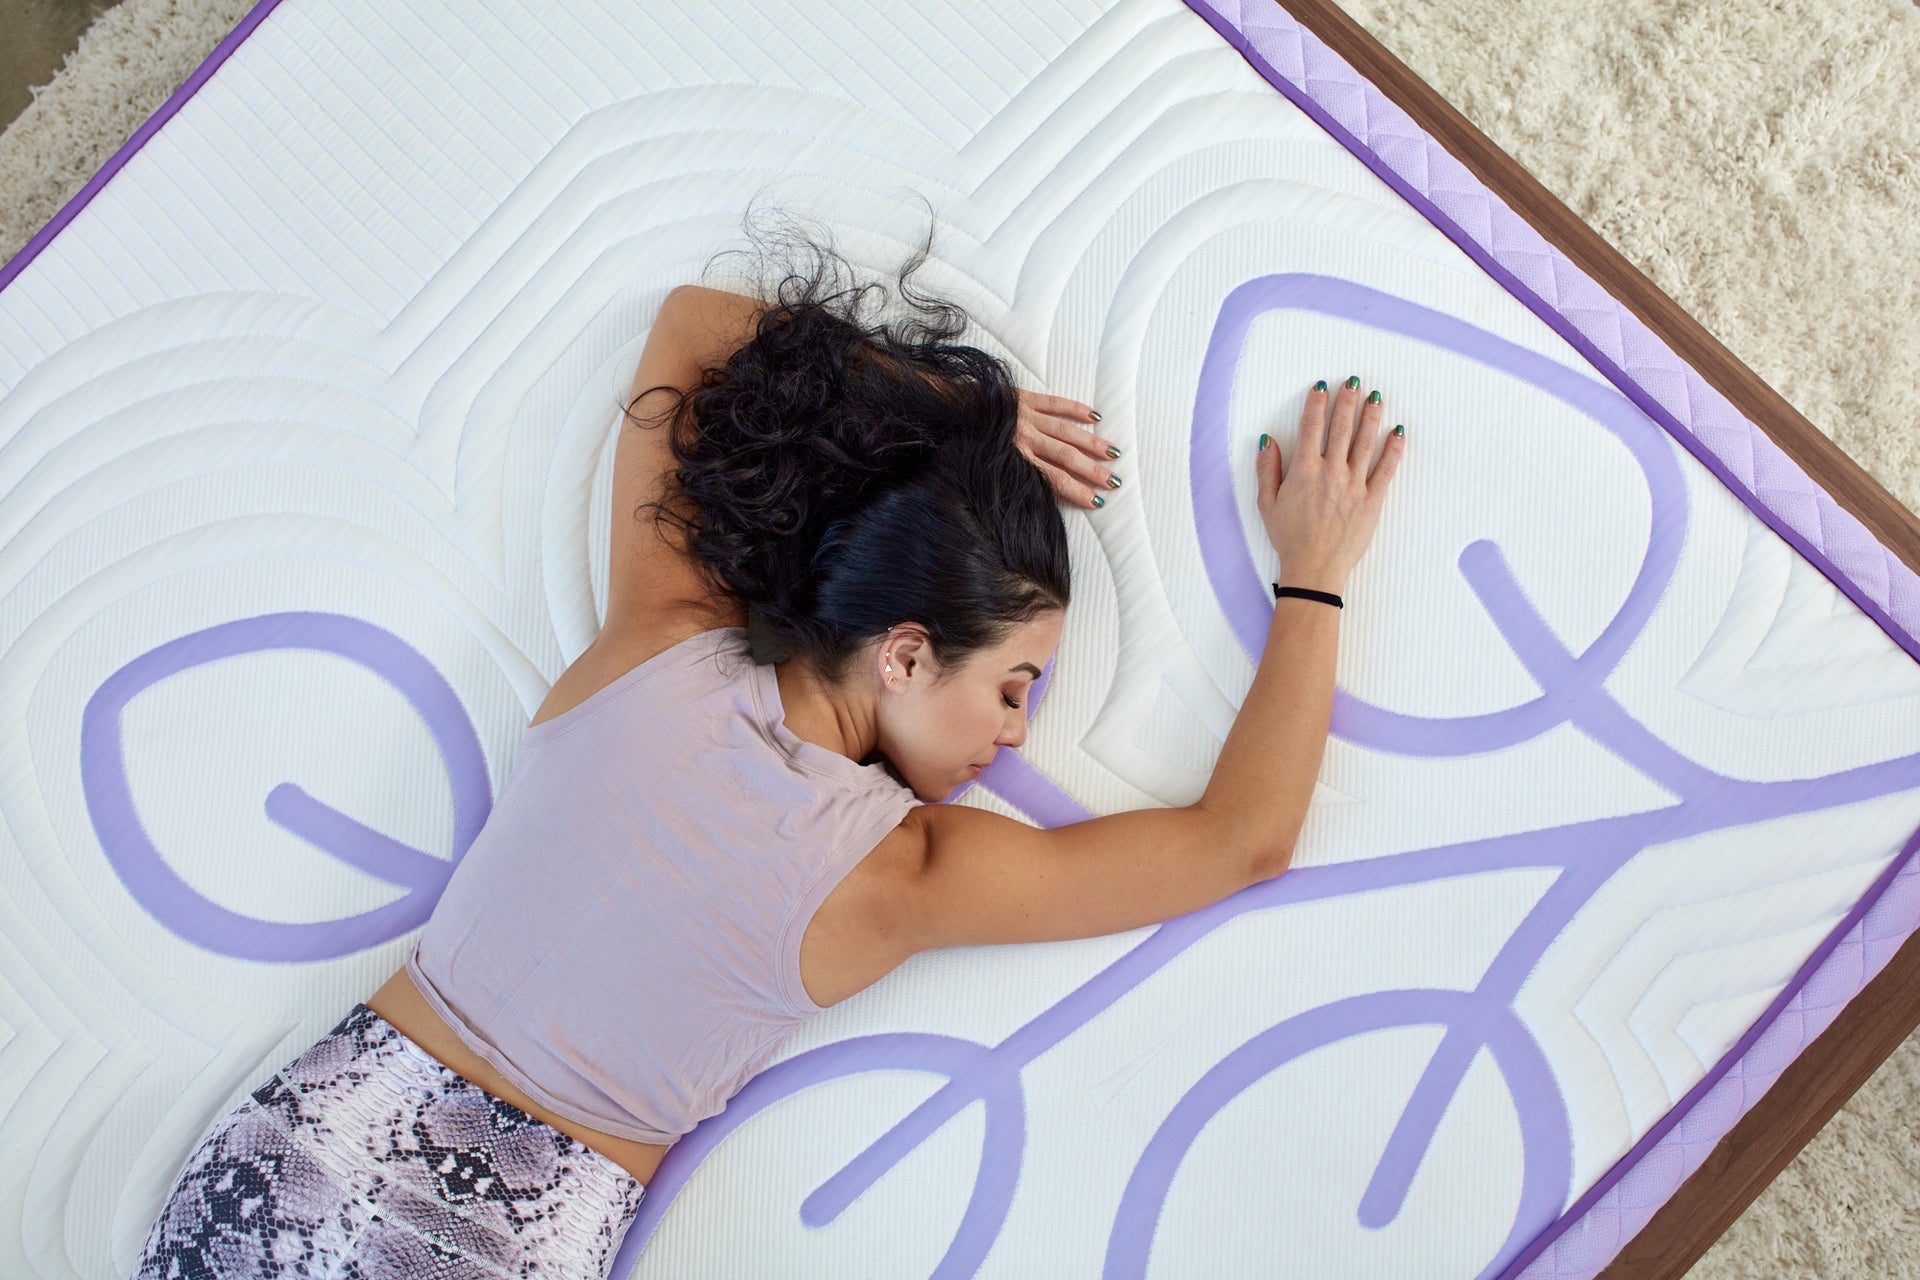 Reader’s Digest said our mattress is “Incredibly cooling and super soft.”